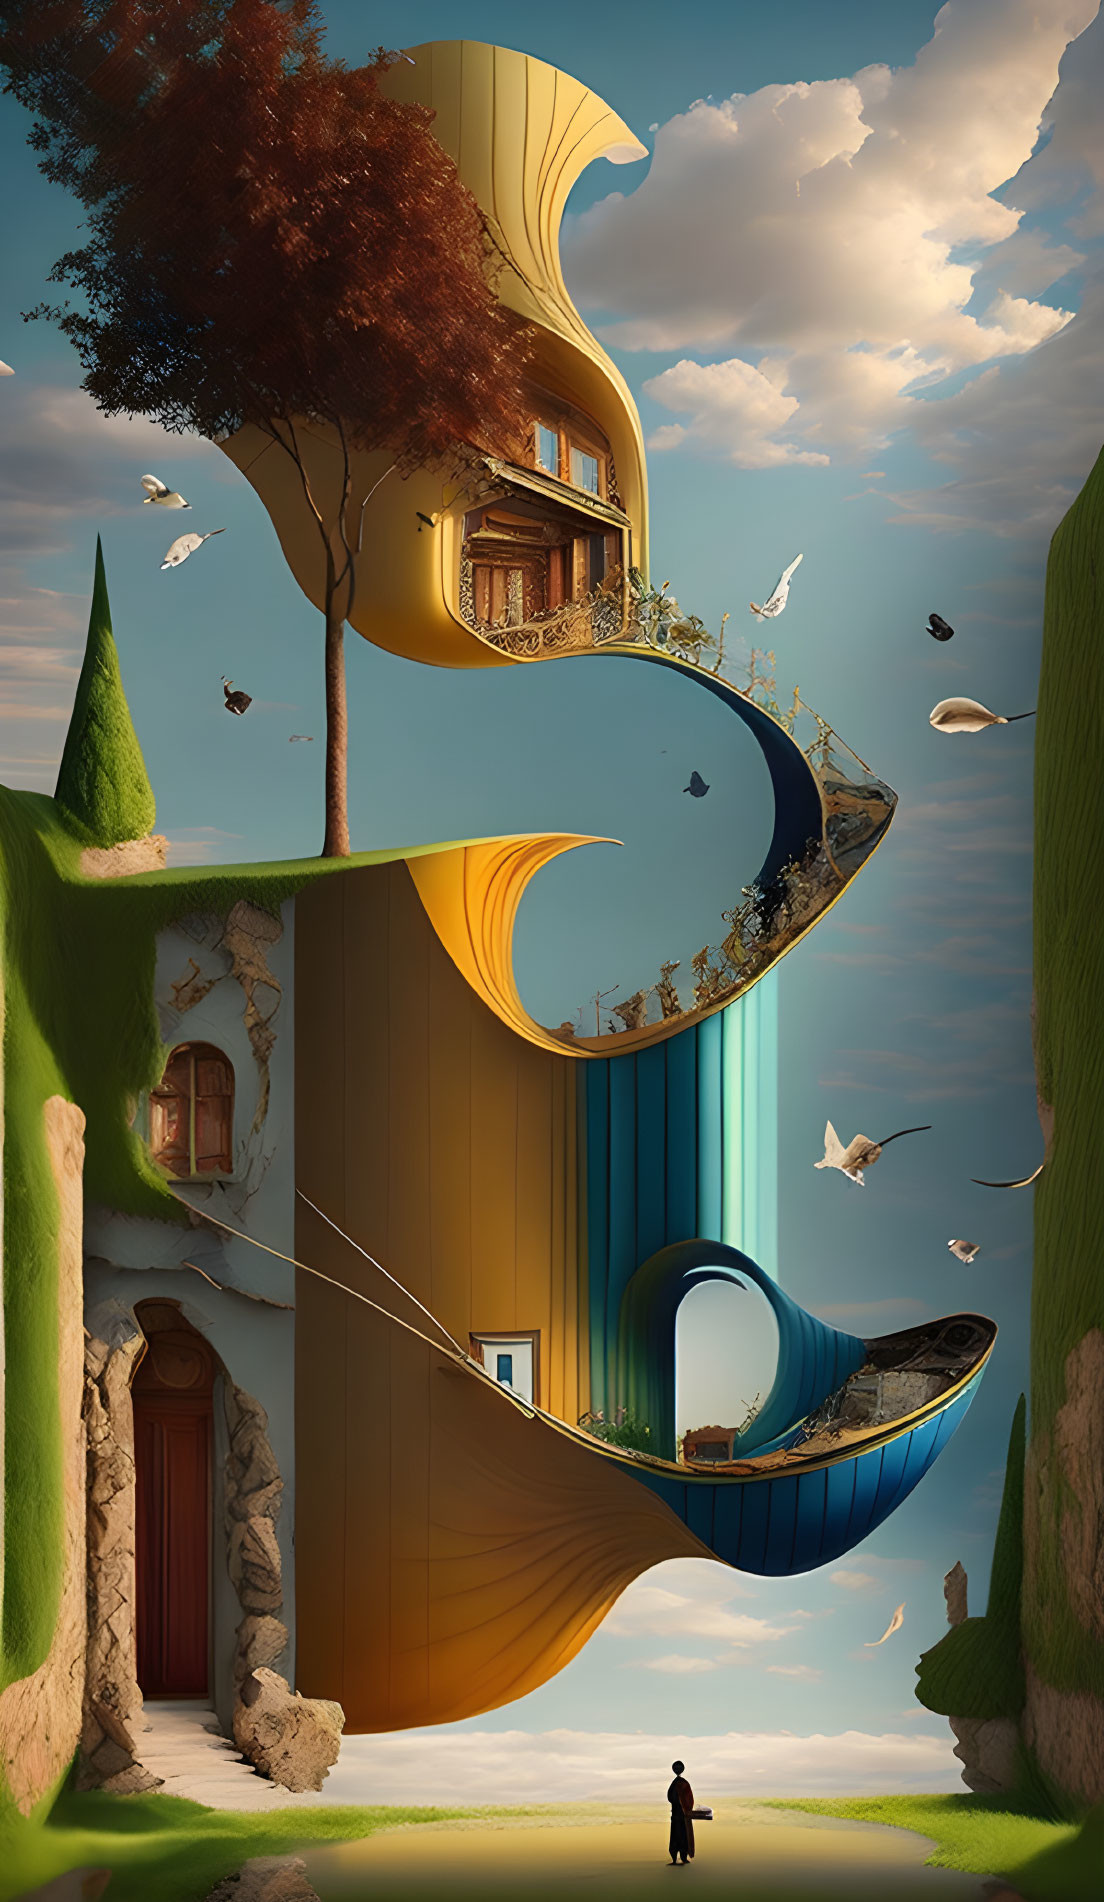 Surreal landscape with violin-shaped building and flying birds